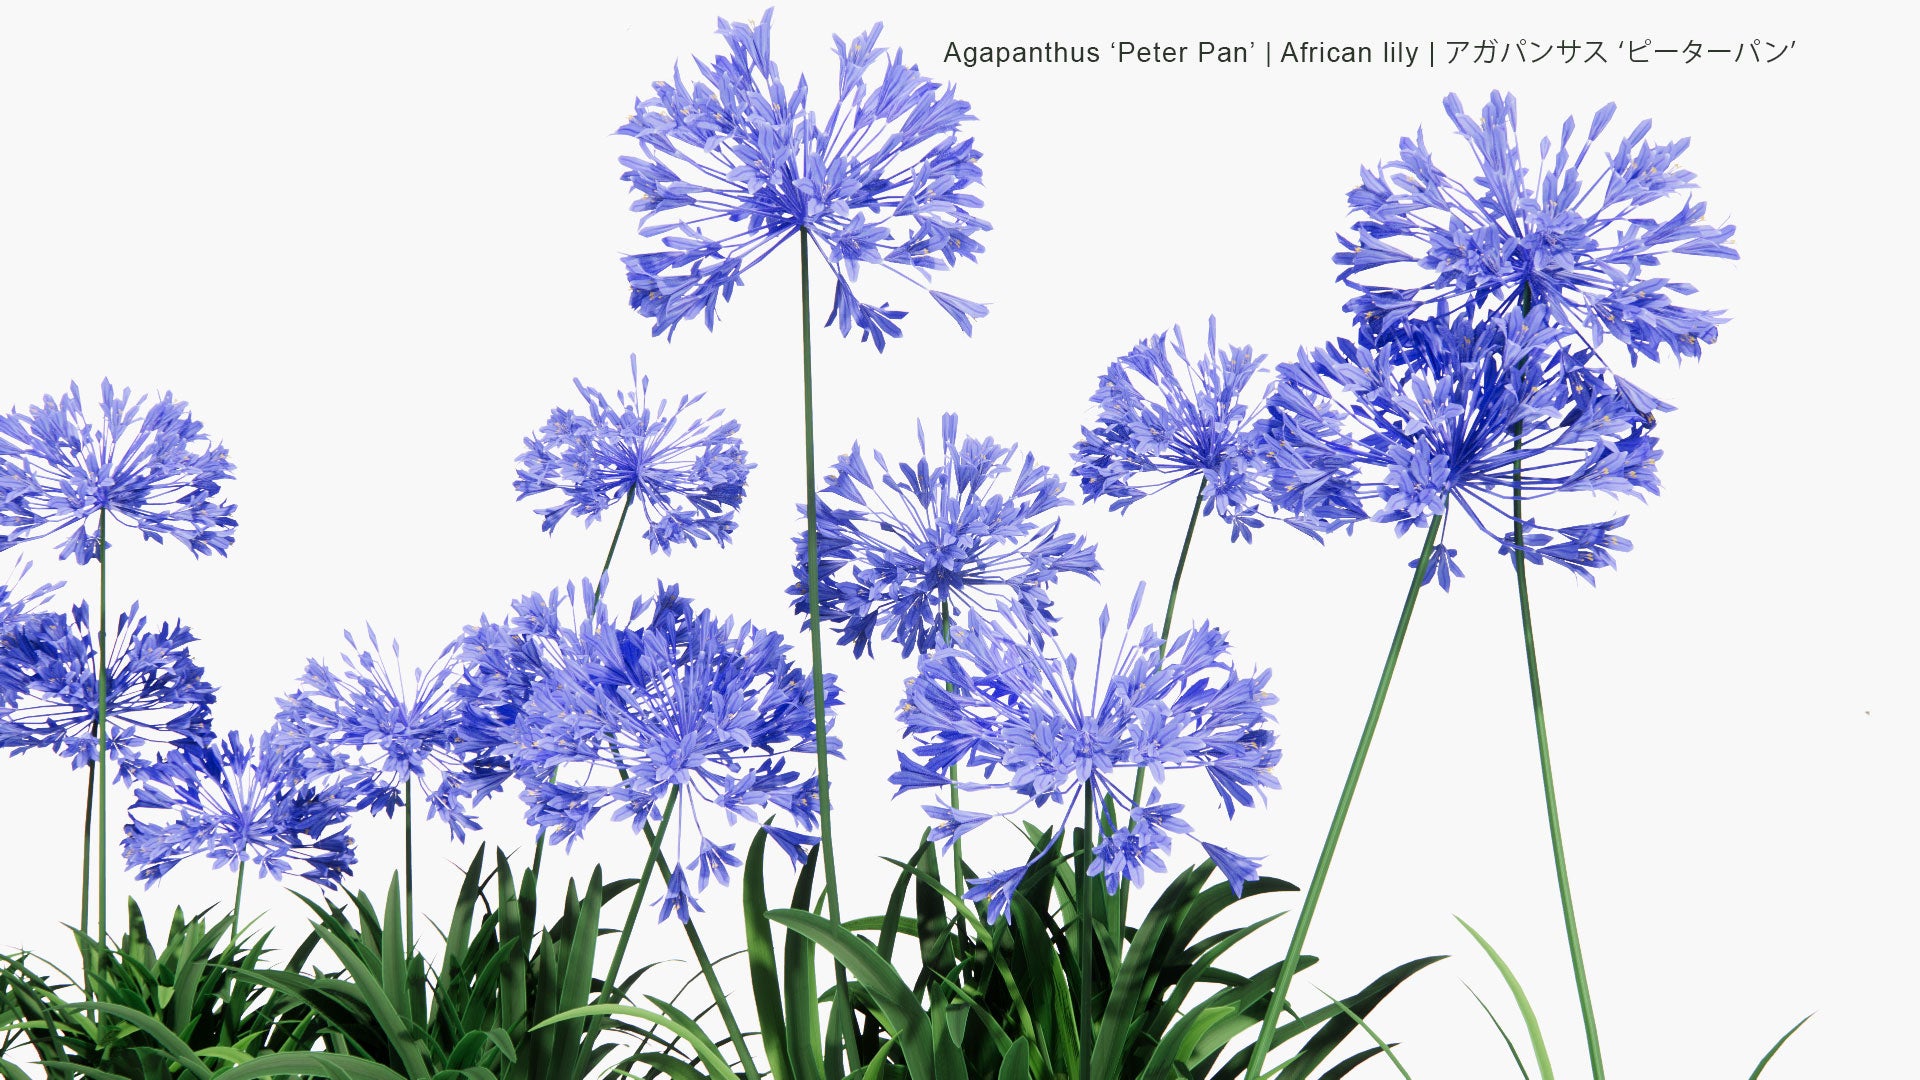 Low Poly Agapanthus Peter Pan - African lily , アガパンサス ‘ピーターパン’ (3D Model)